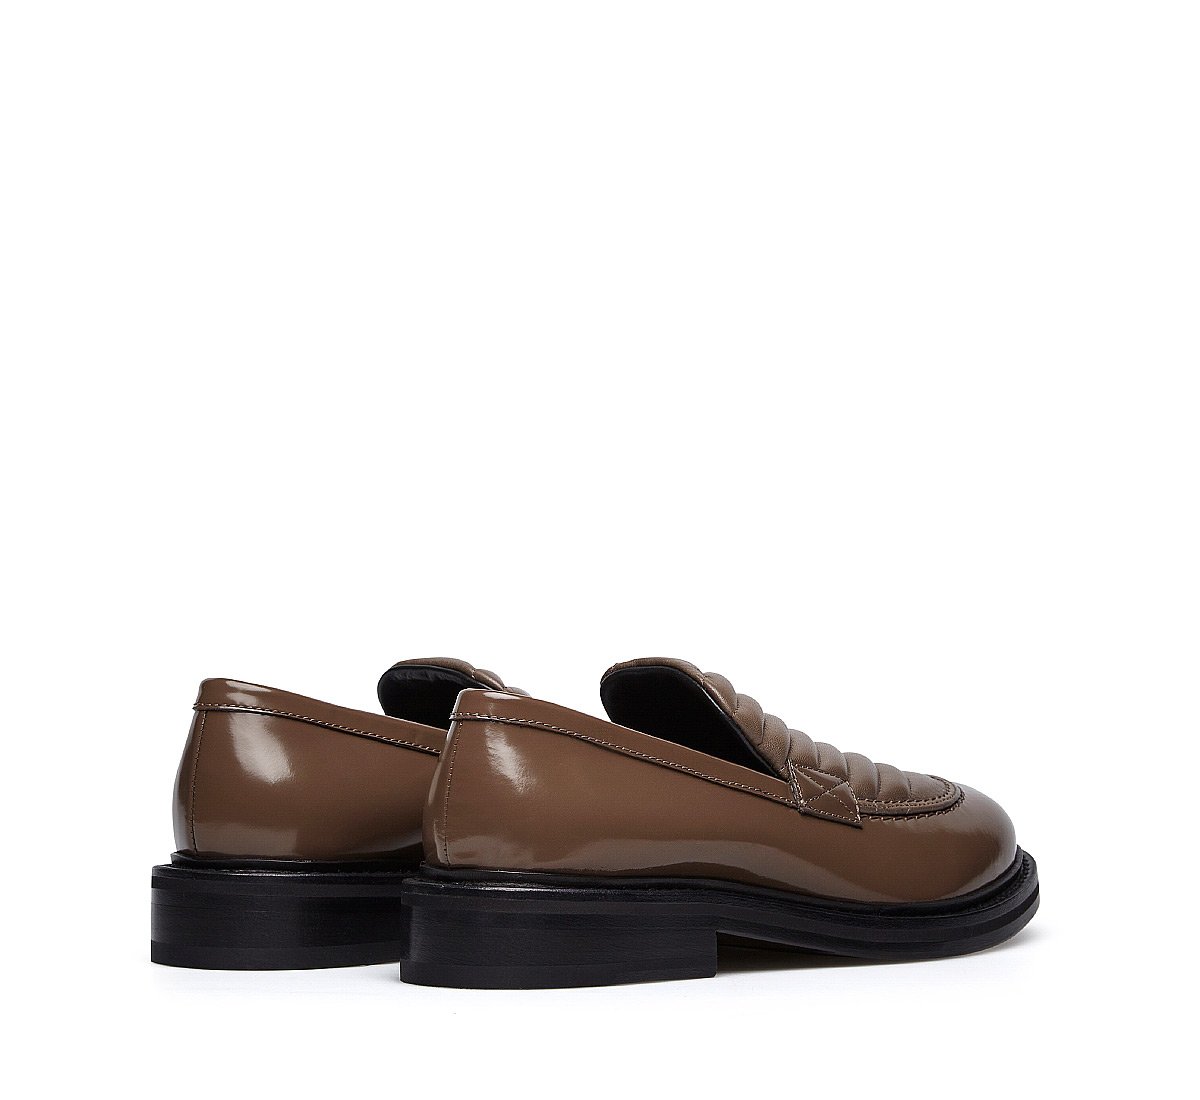 Moccasins in brushed calfskin and nappa